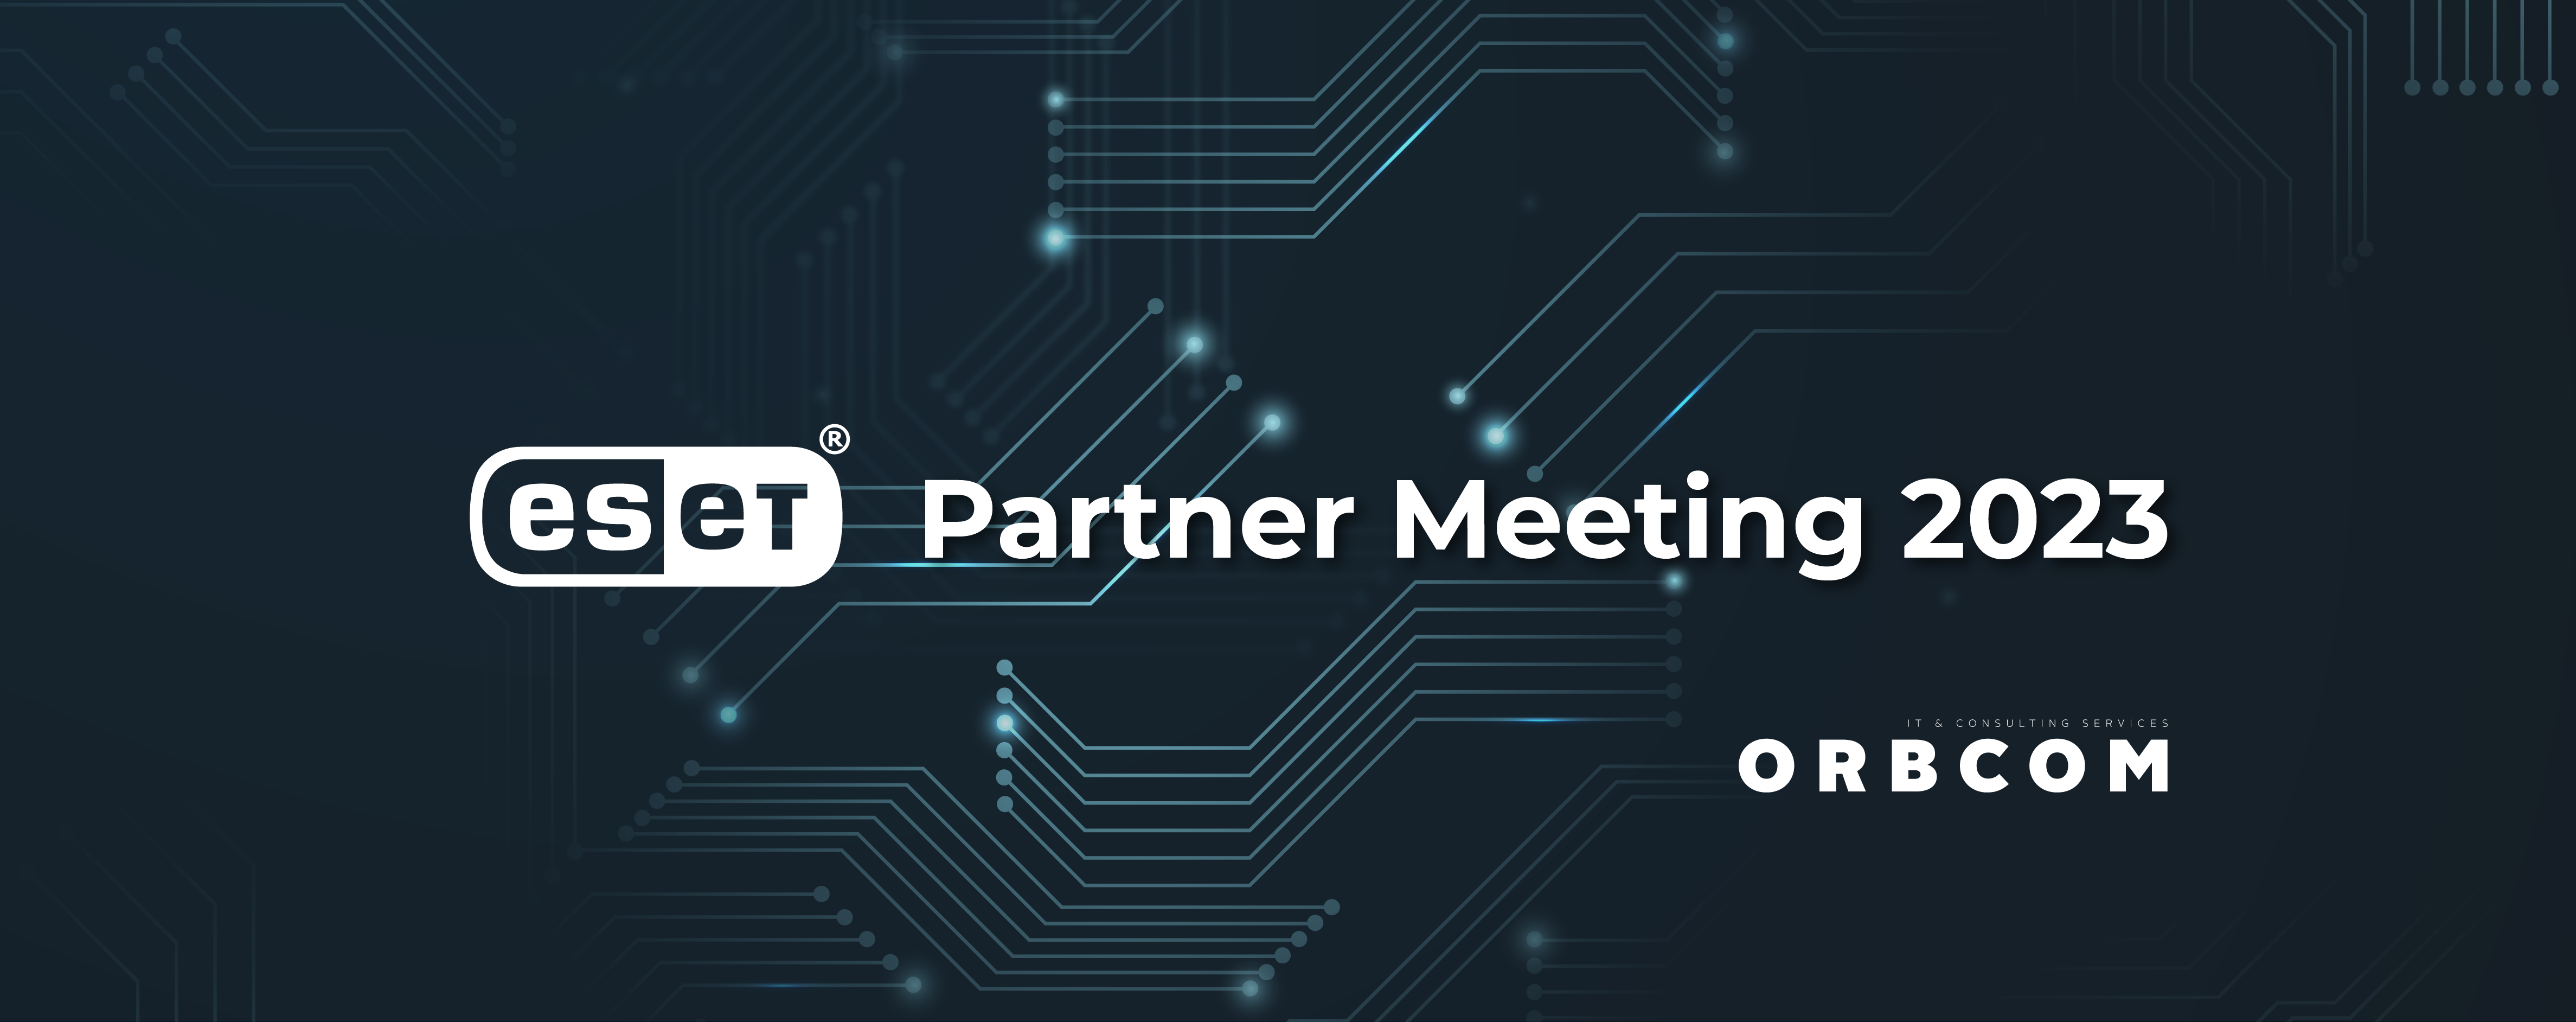 Orbcom is awarded on the highly anticipated ESET Partner Meeting 2023